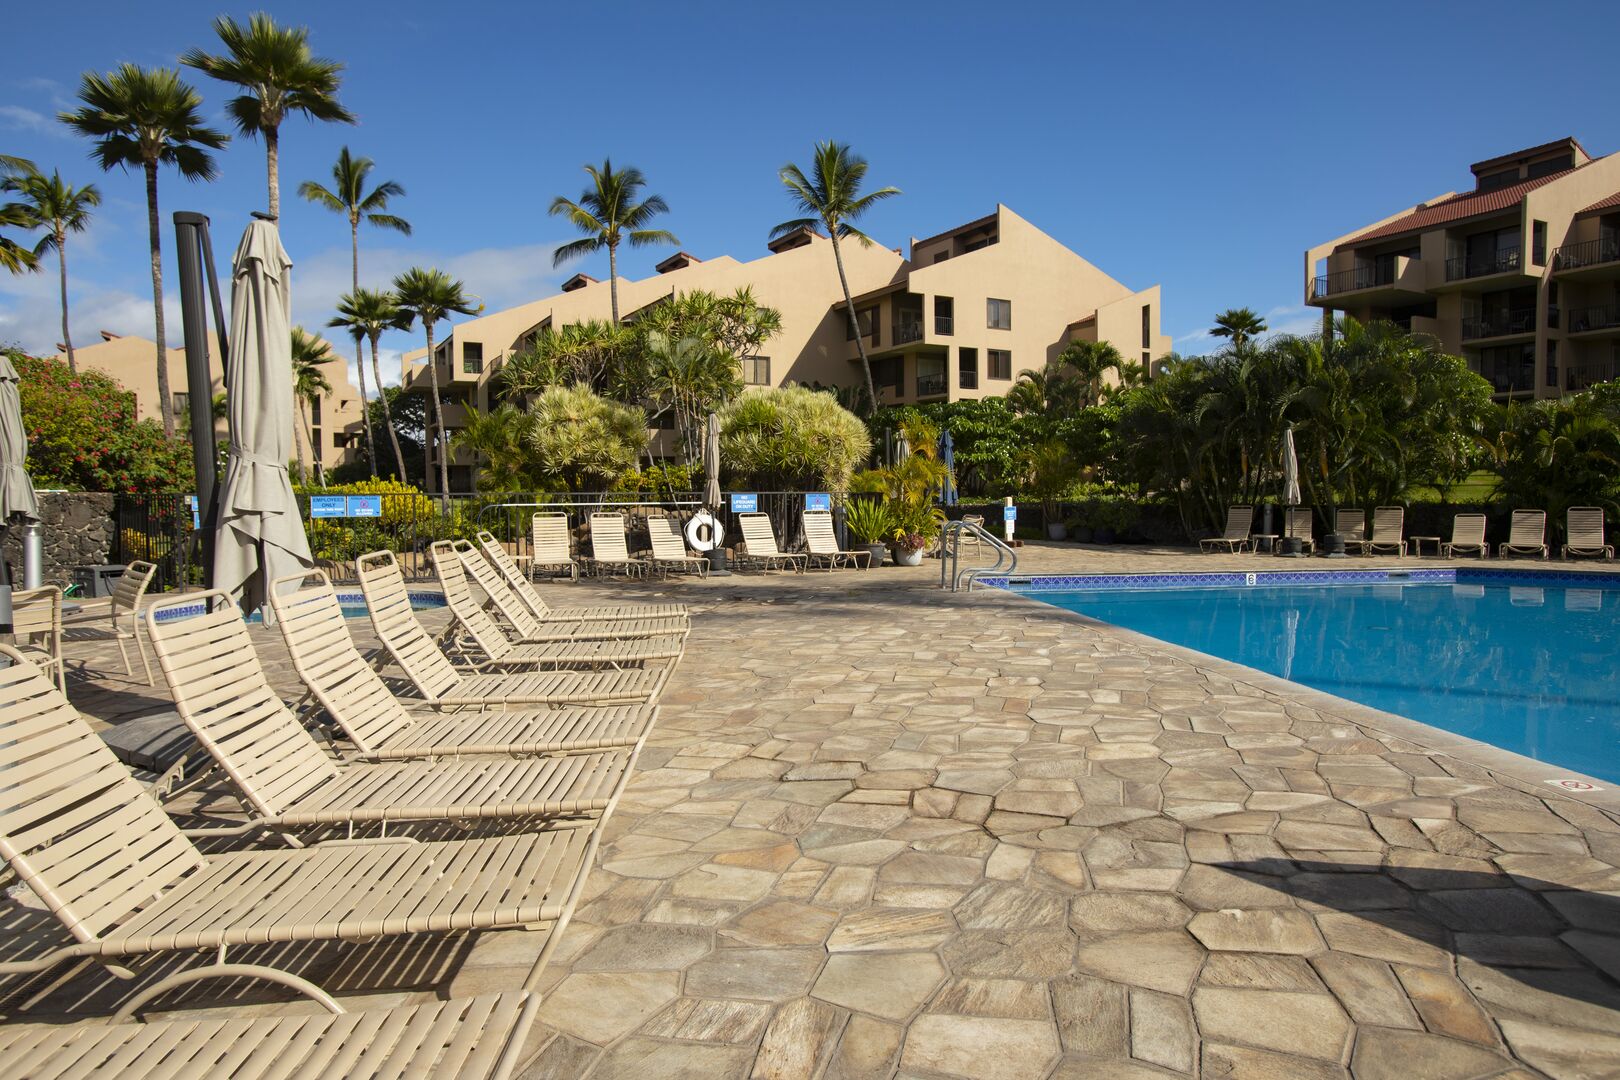 Sun loungers by the swimming pool